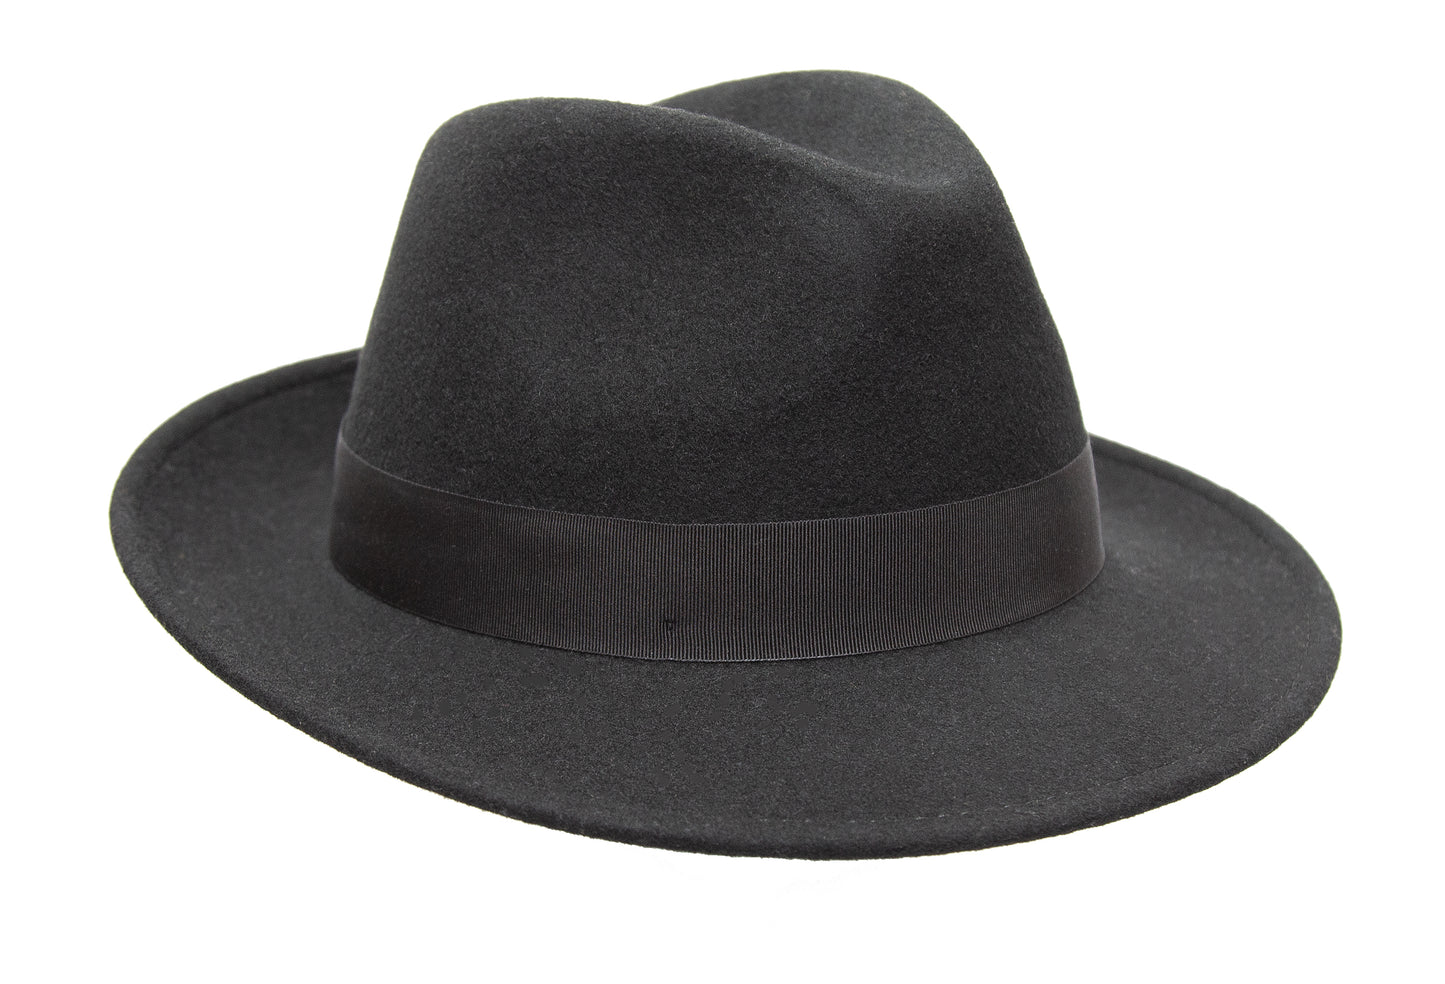 Crumpleable wool felt hat for women and men with leather hat band and logo